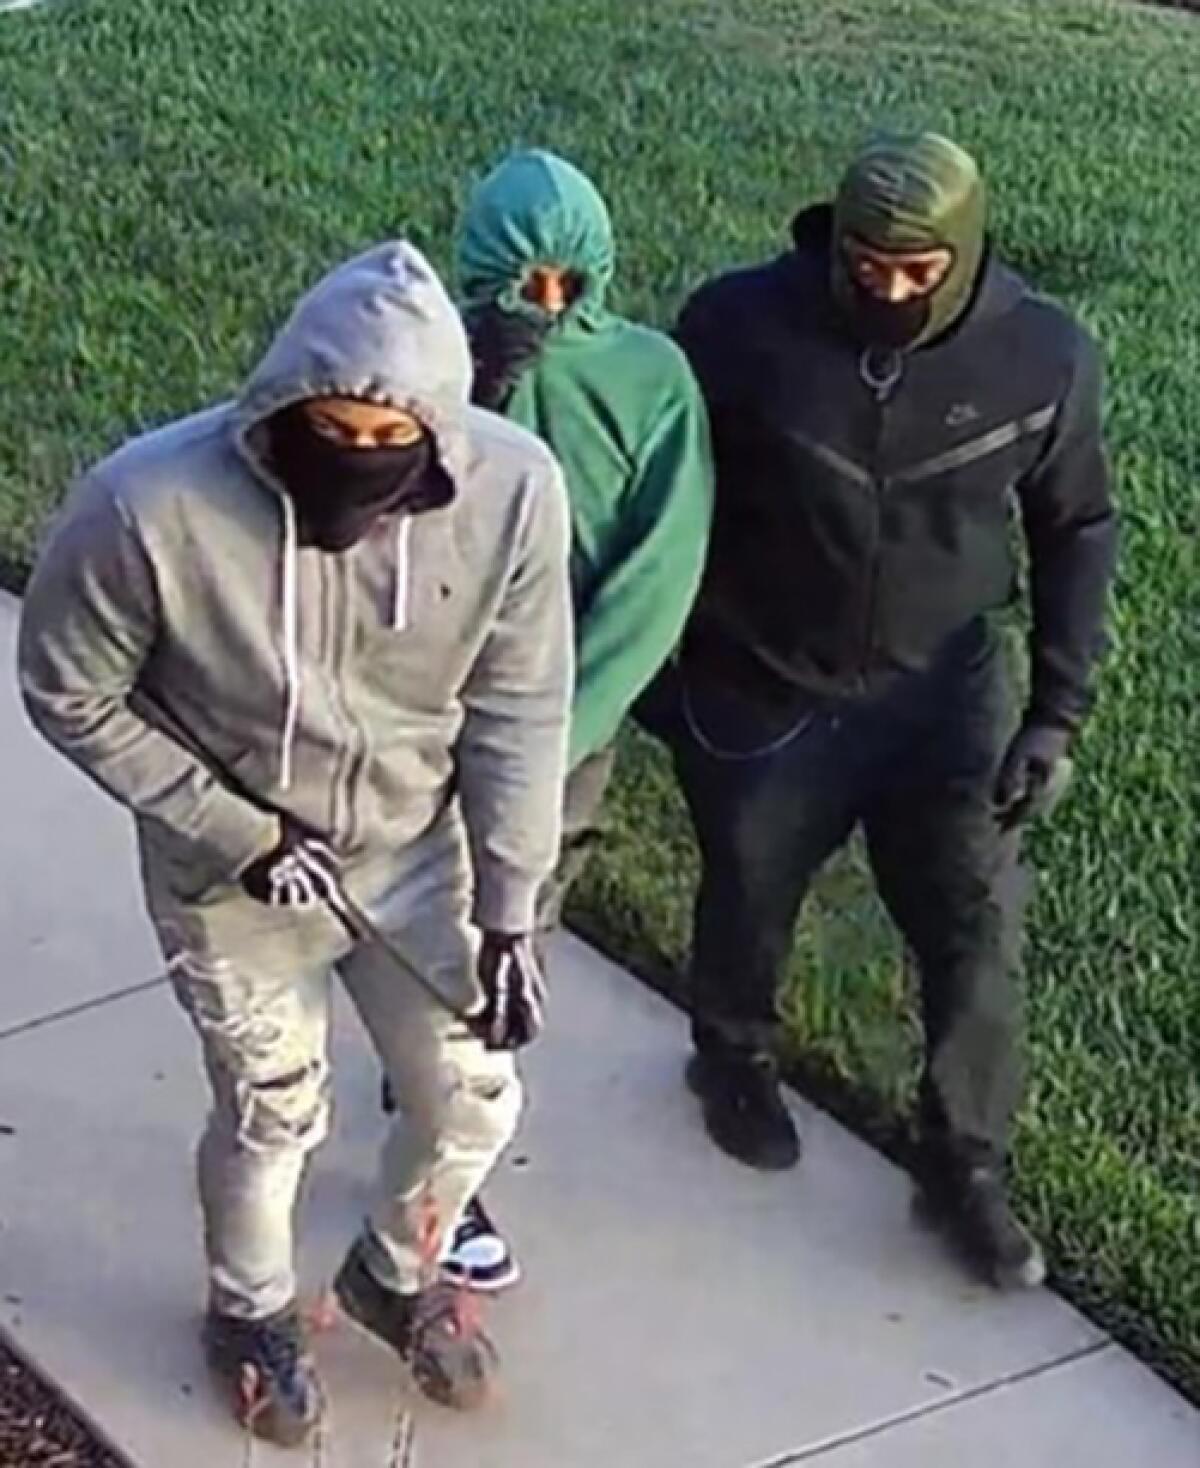 Three suspects in a burglary in East County on July 21.